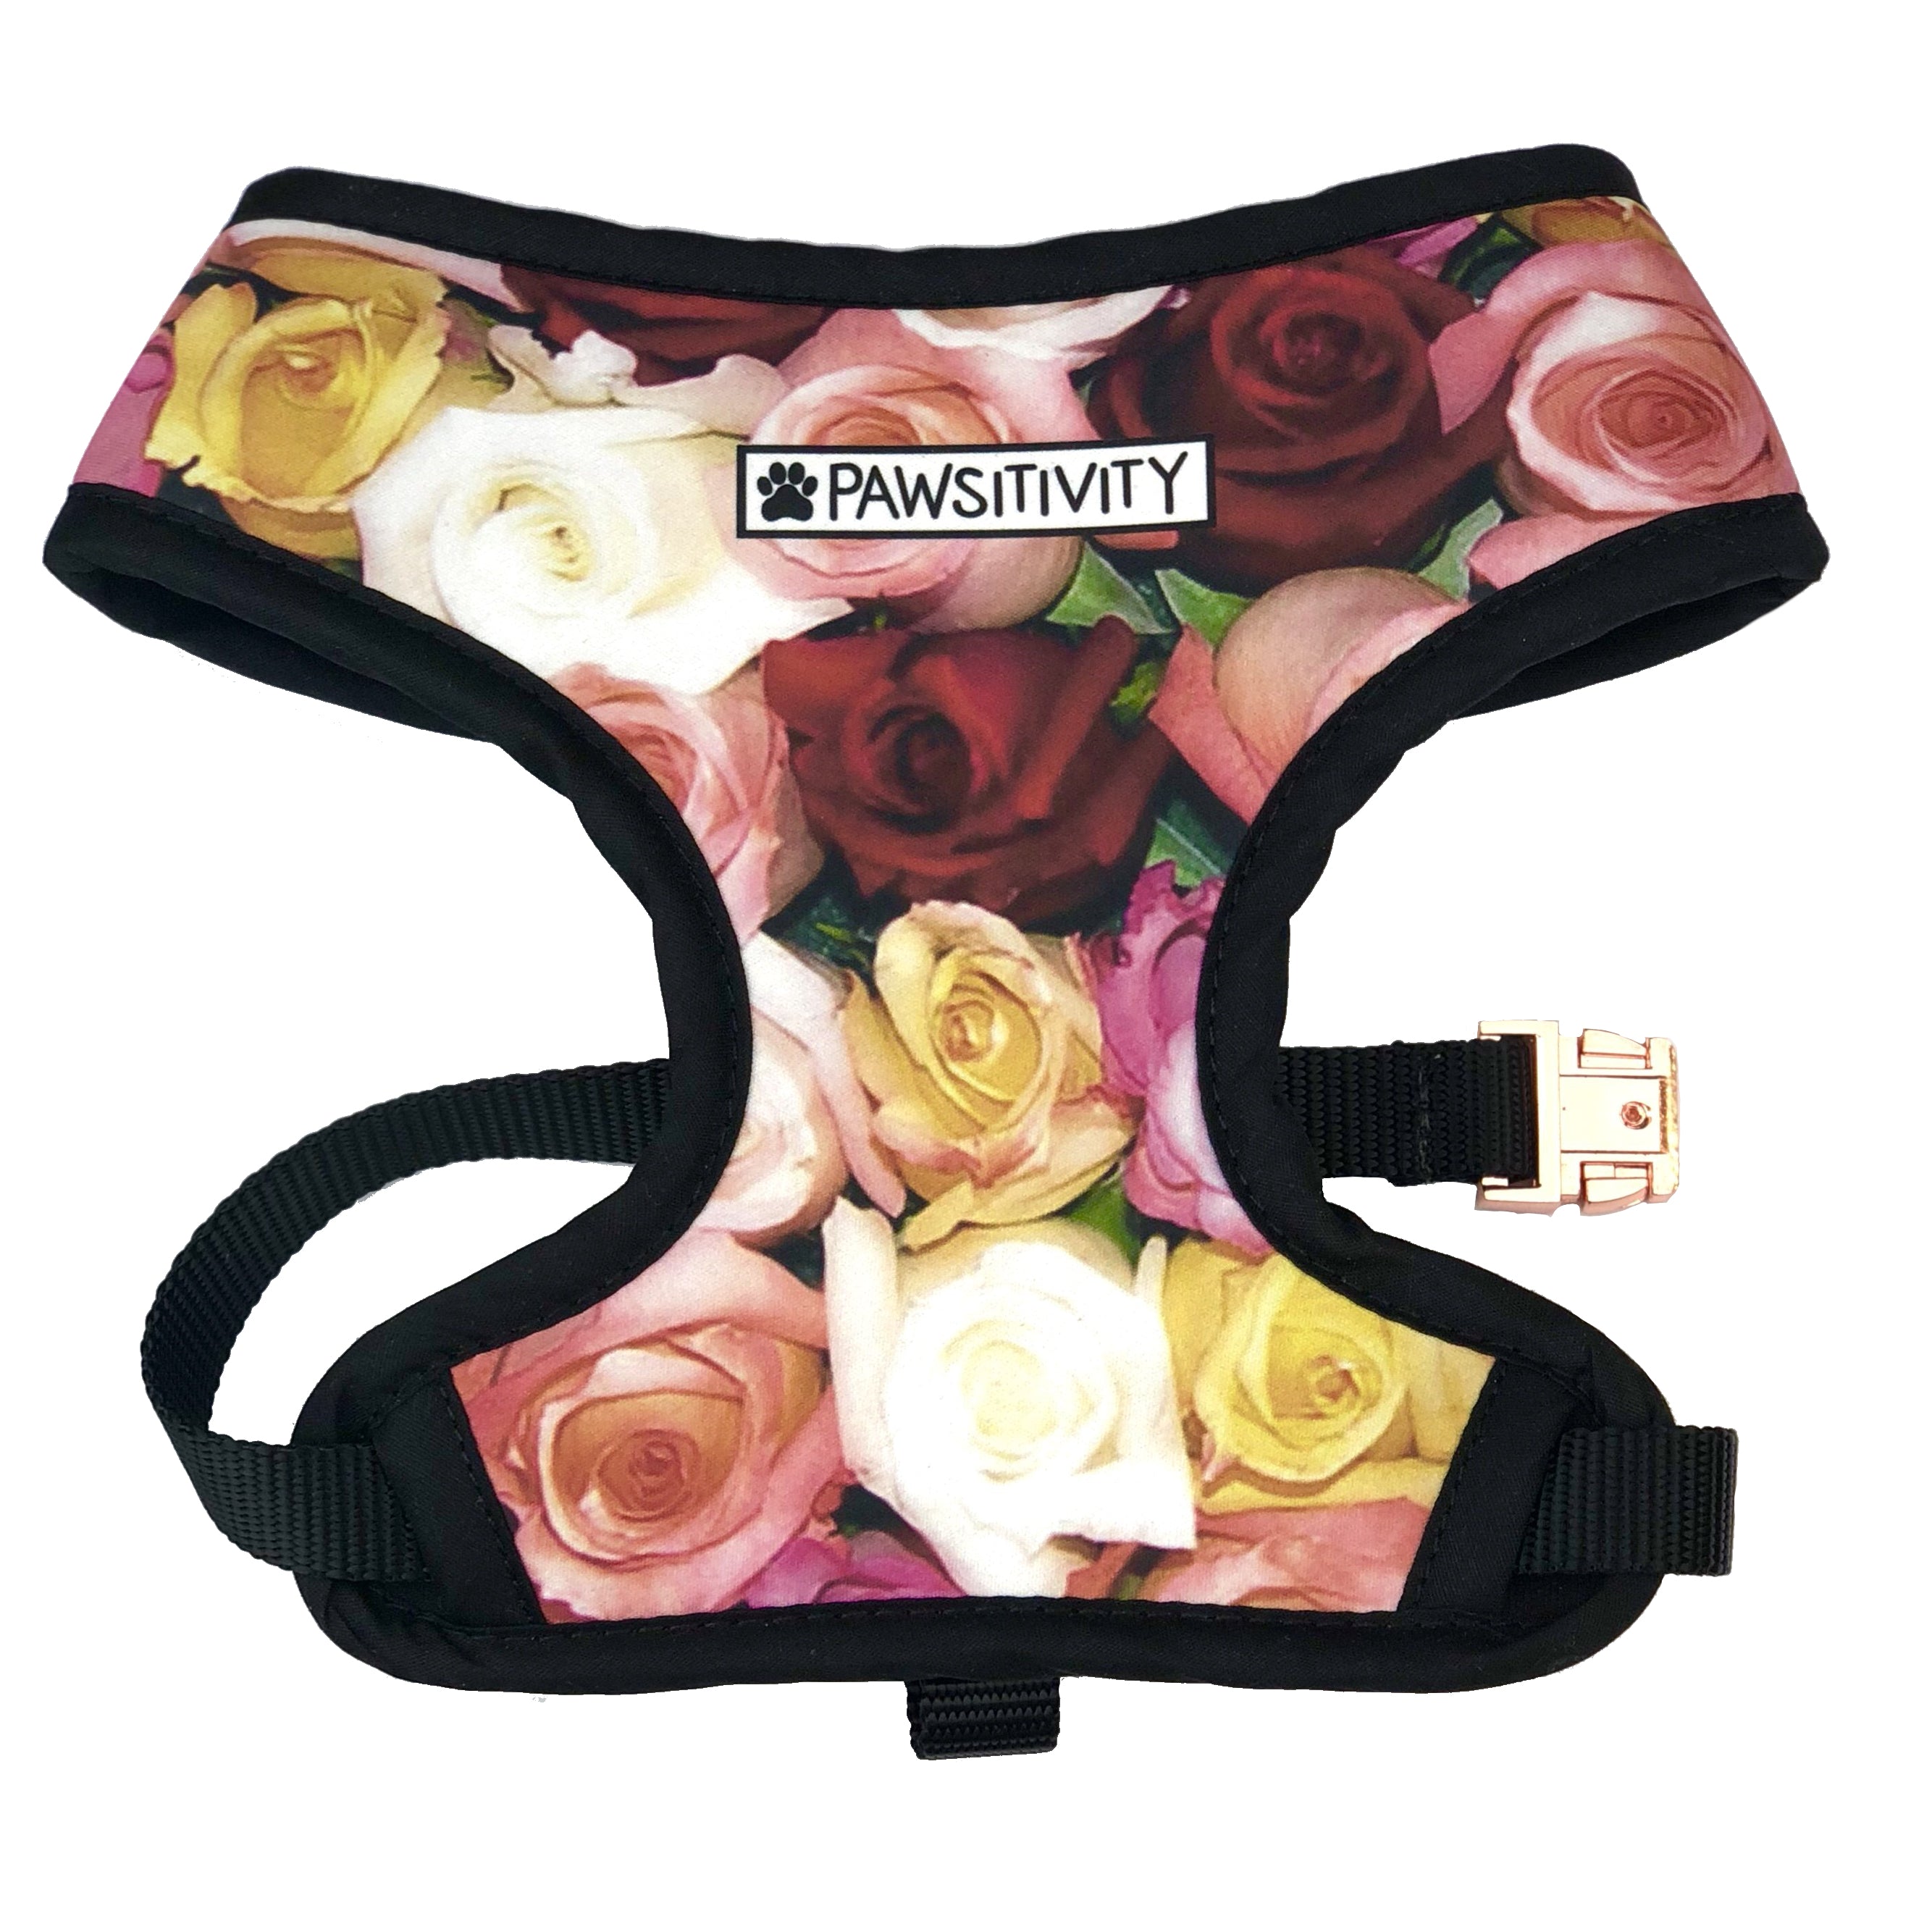 Pawsitivity Reversible "Her Royal Harness" - Limited Edition!